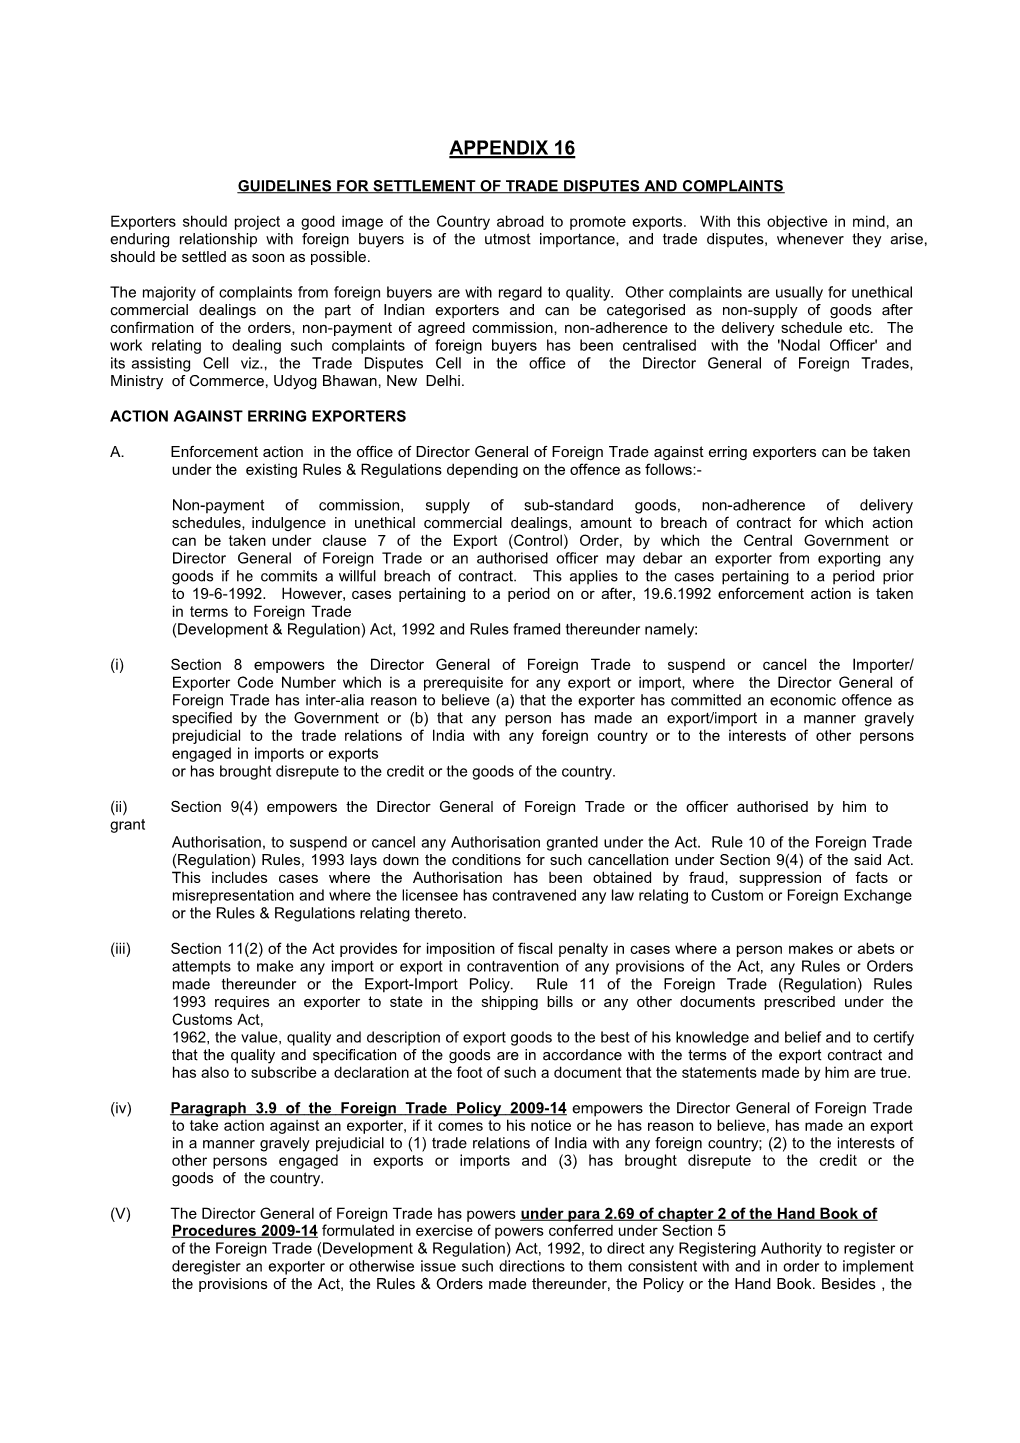 Guidelines for Settlement of Trade Disputes and Complaints